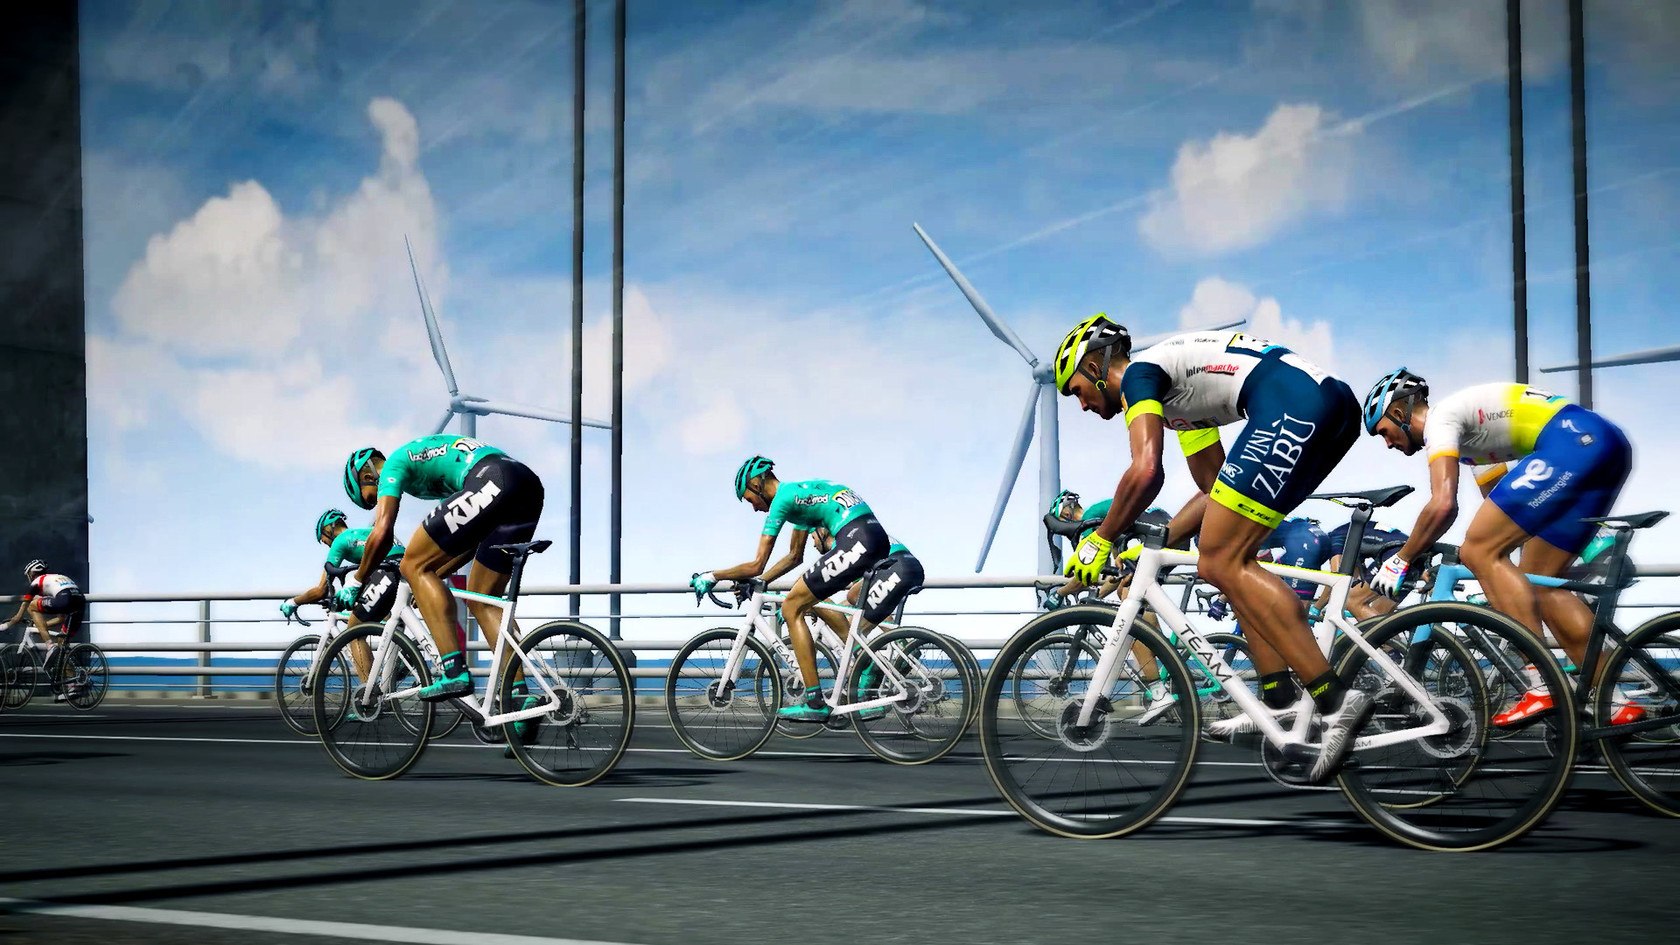 Pro Cycling Manager 2021 System Requirements